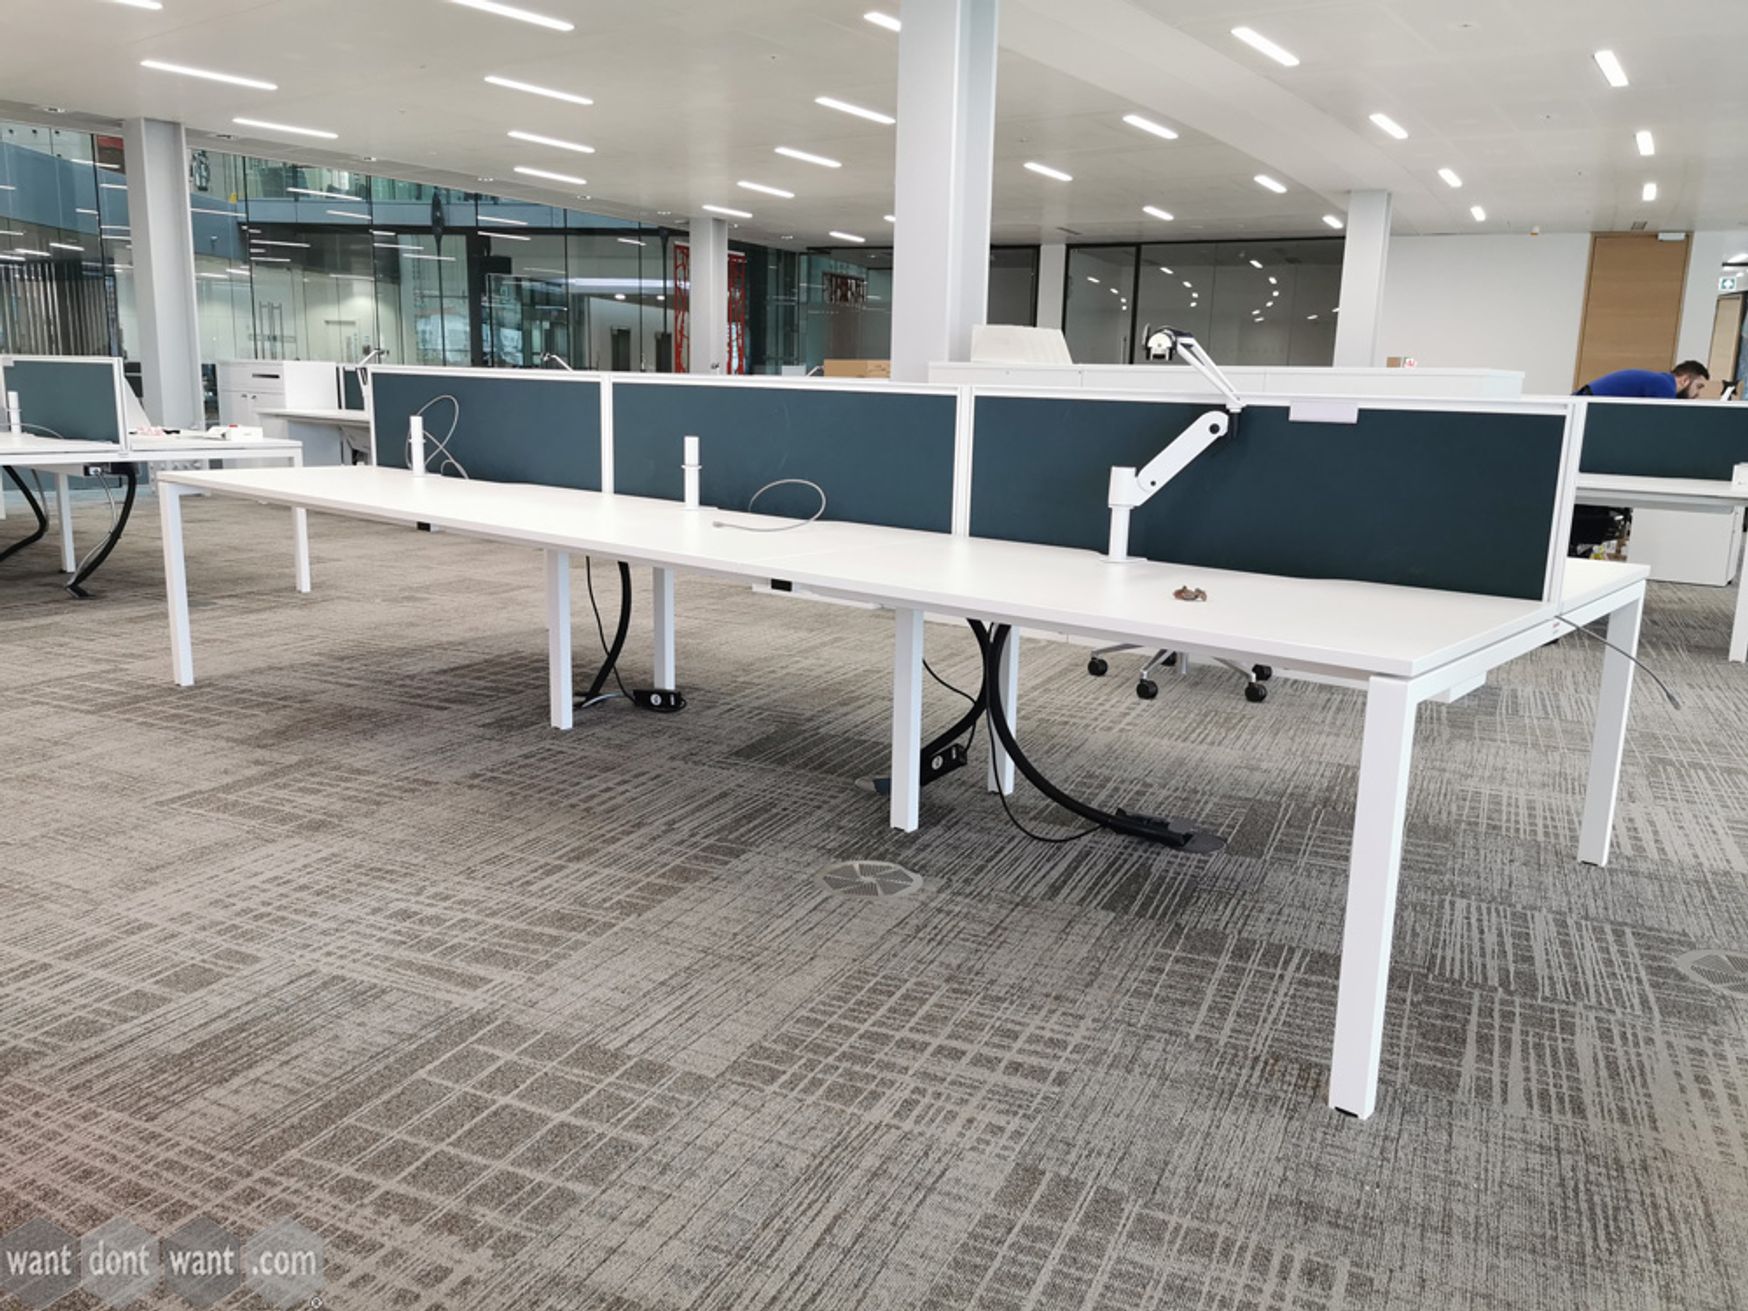 Used 'KI' 1400mm wide white bench desk positions in various configurations.